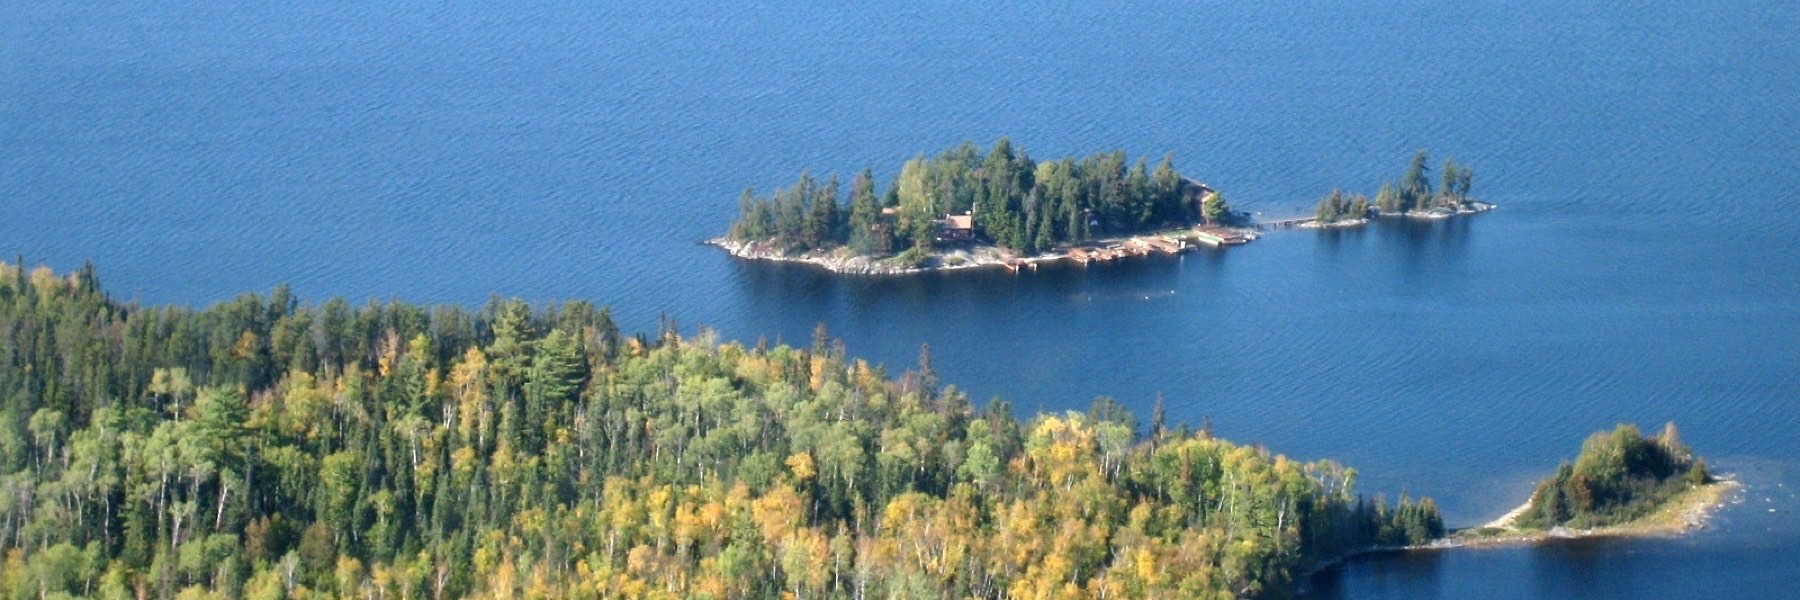 Loch Island Lodge from the Air - Wilderness Ontario Fishing Canada